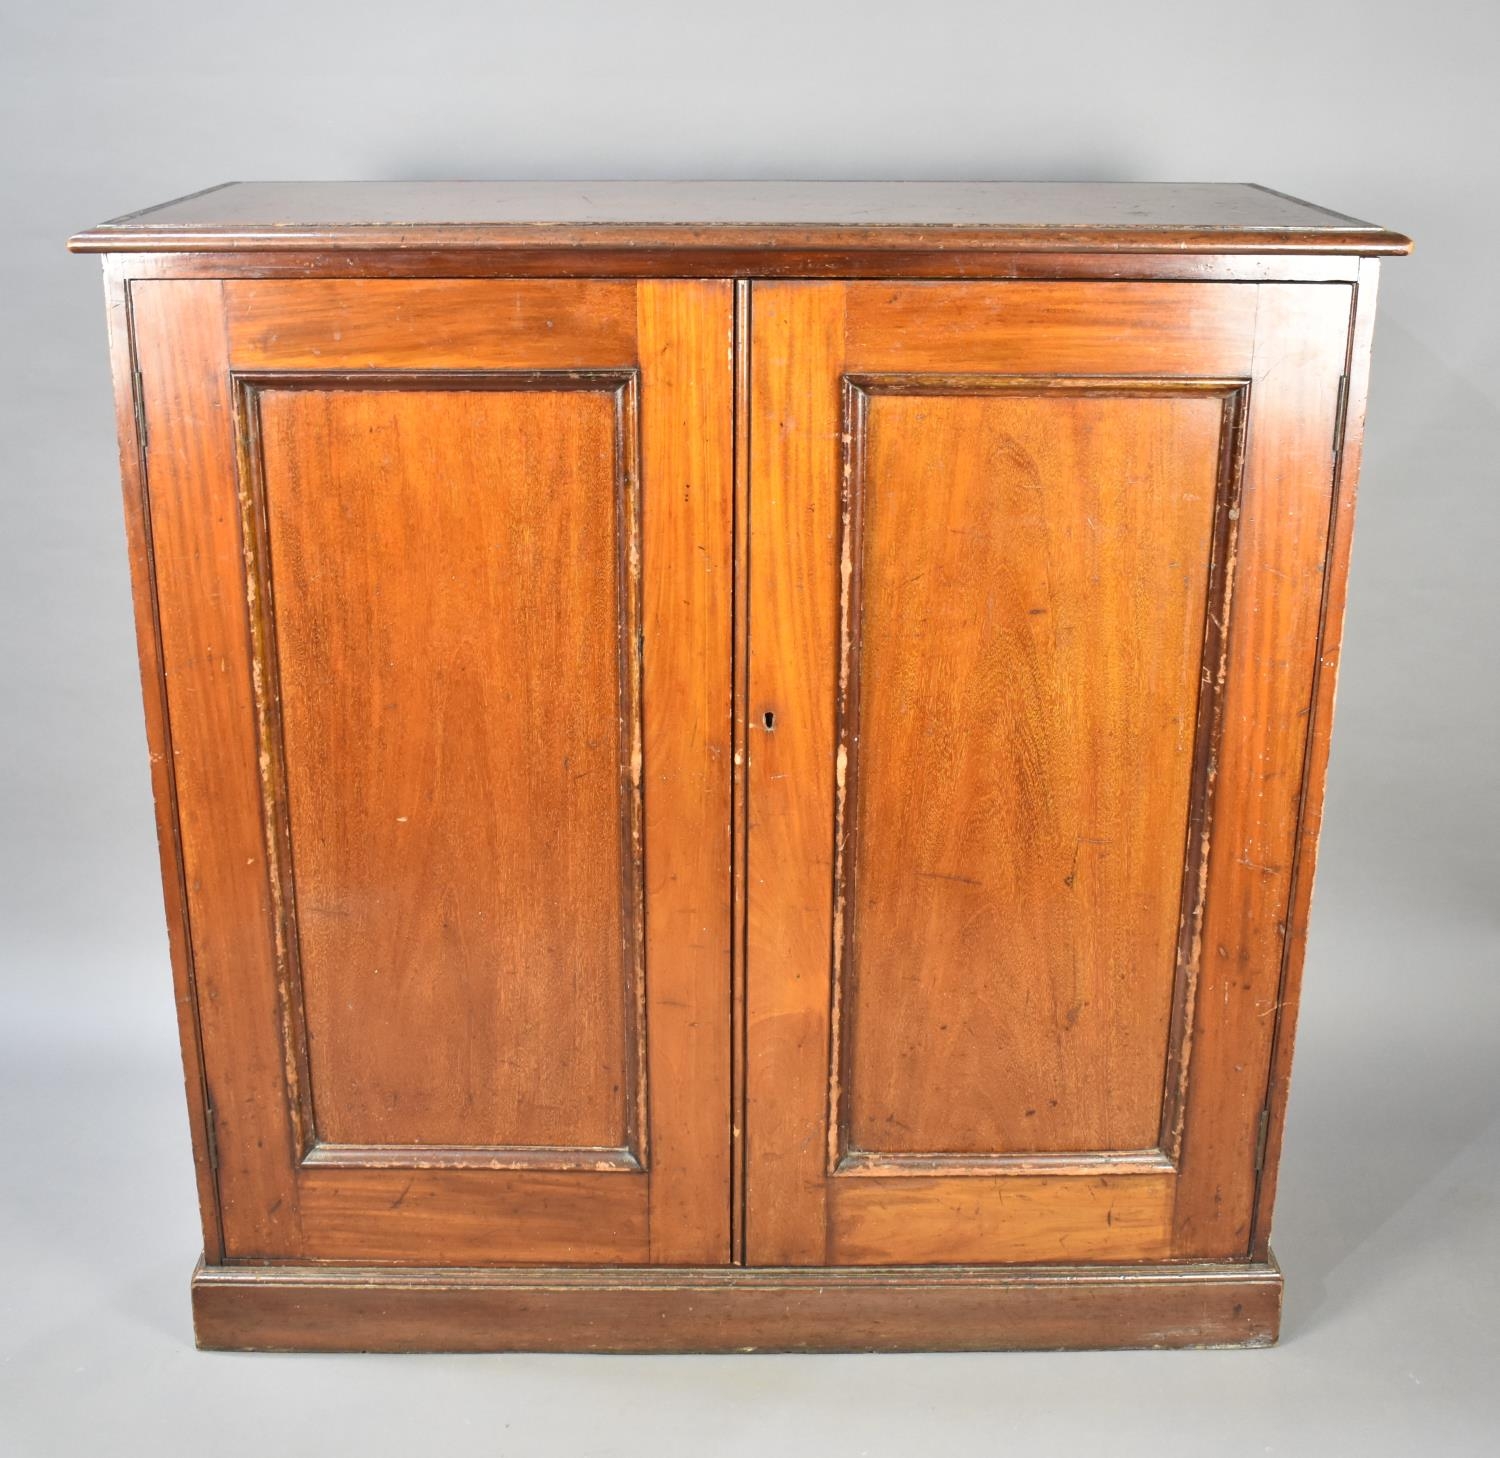 A Late Victorian/Edwardian Mahogany Side Cabinet With Panelled Doors wot Shelved Interior, 111cms